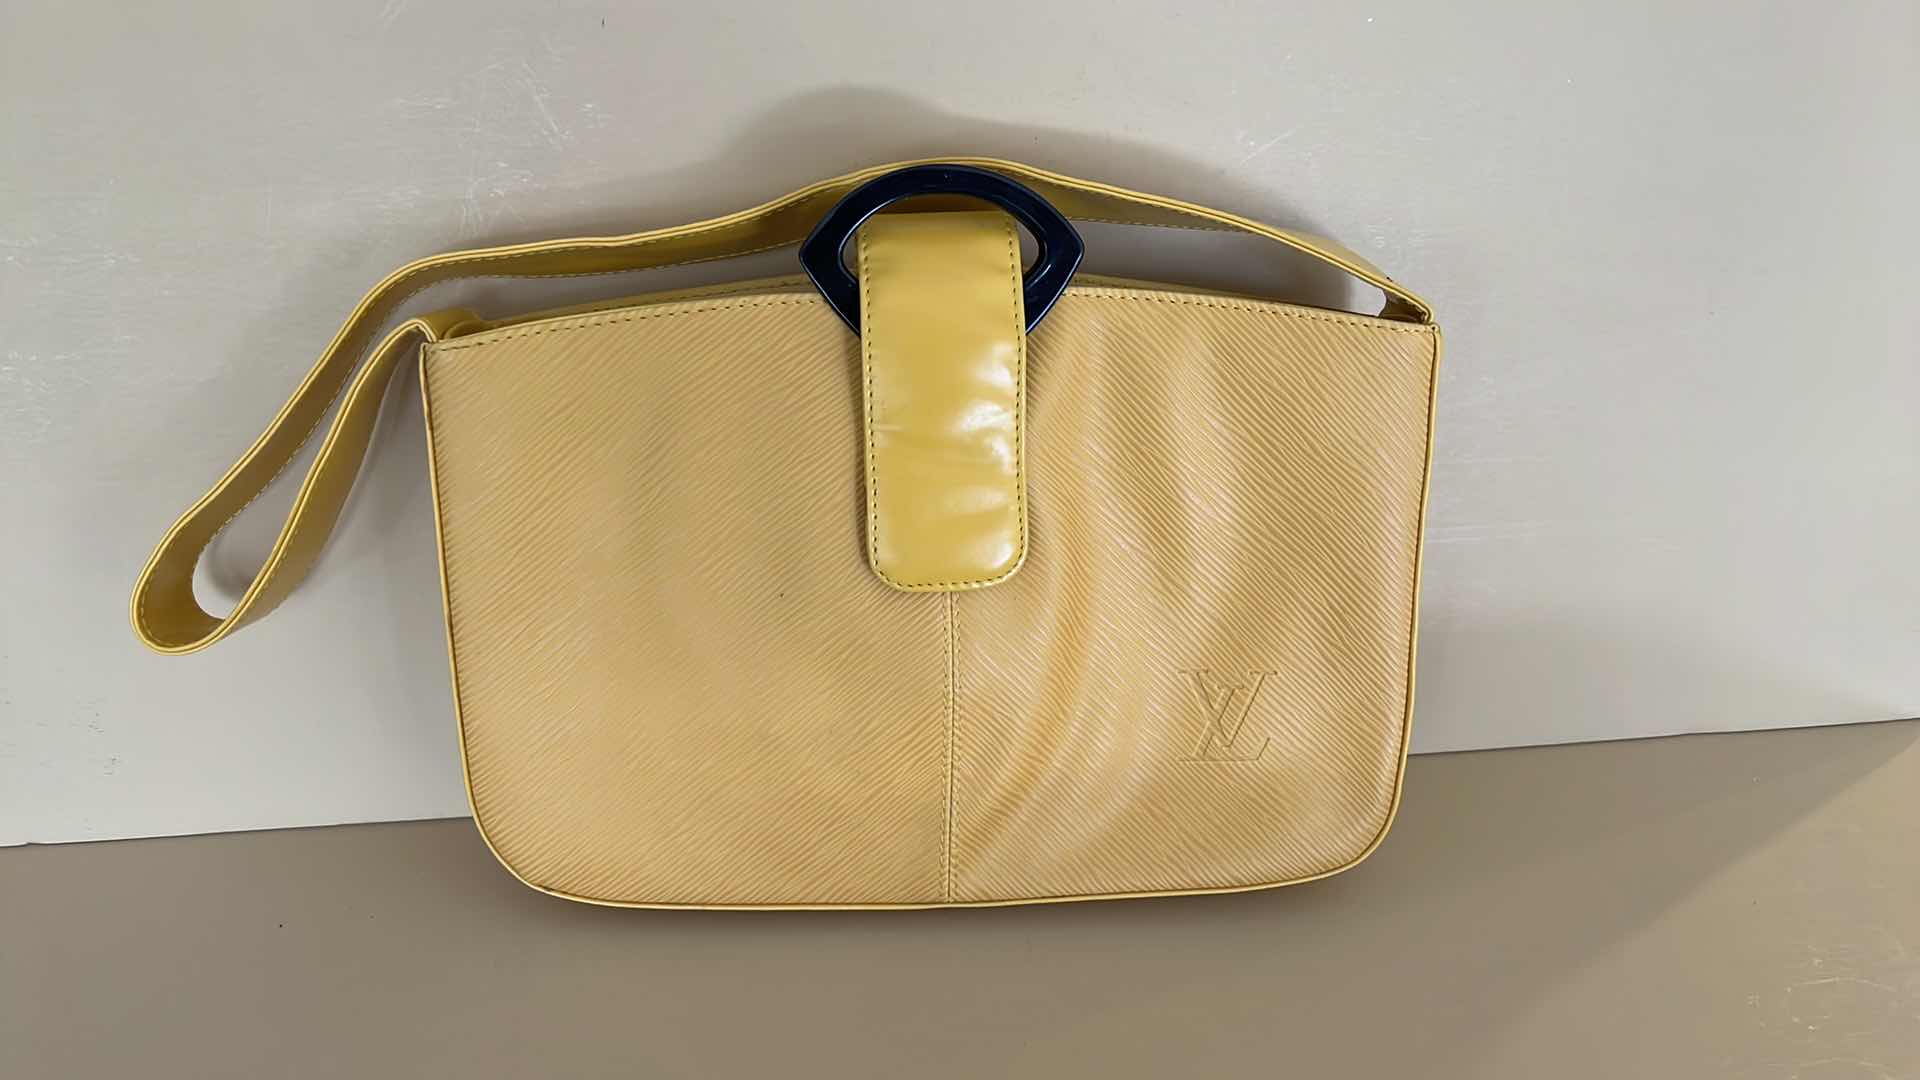 Photo 1 of CANARY YELLOW LOUIS VUITTON HANDBAG (NOT AUTHENTIC)